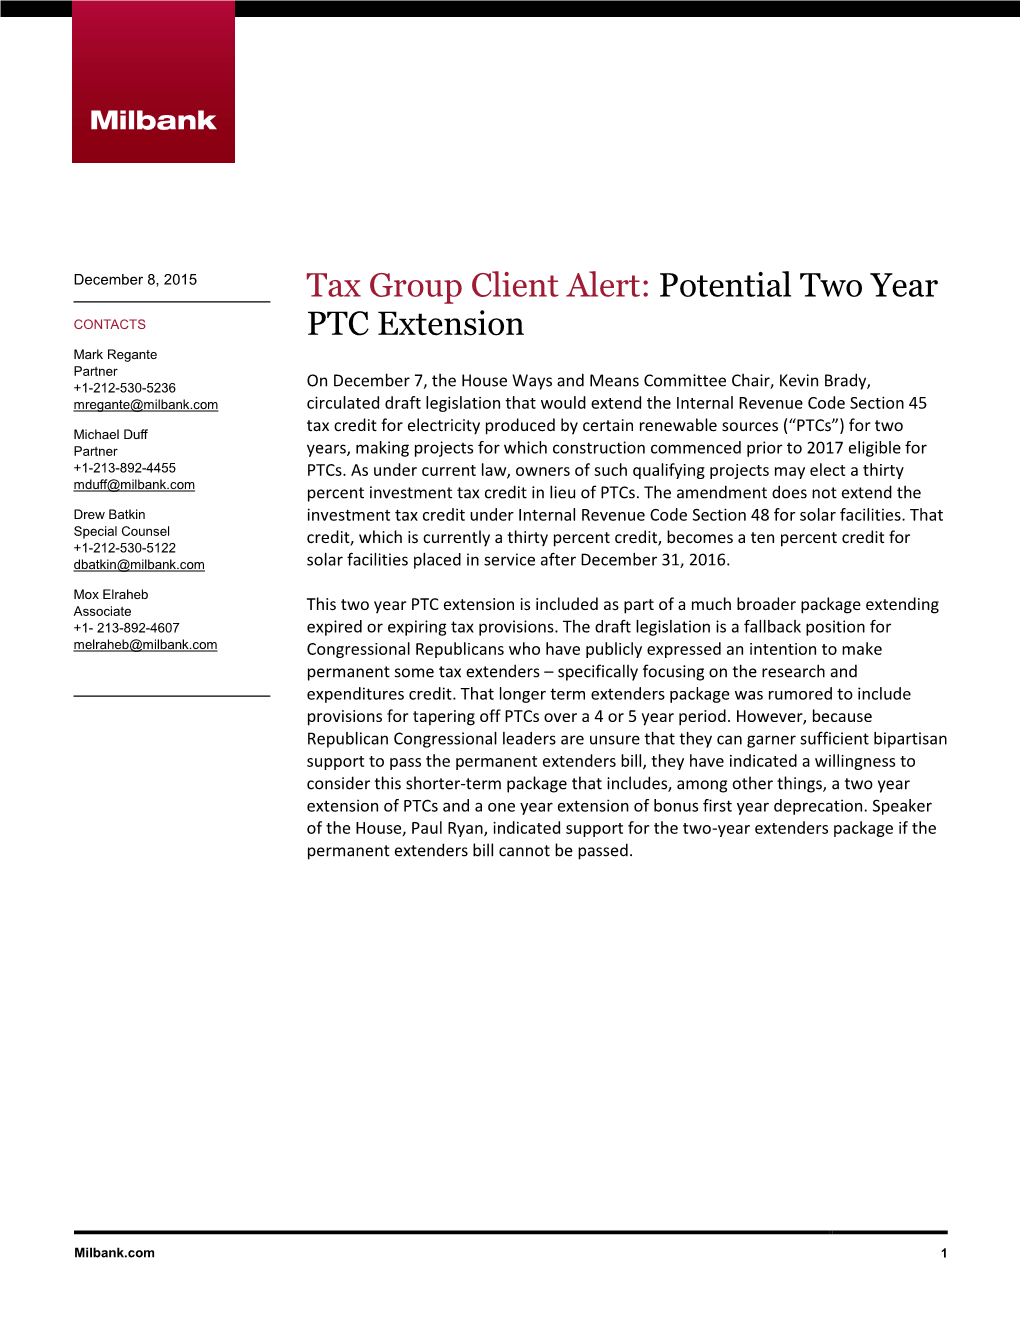 Tax Group Client Alert: Potential Two Year PTC Extension